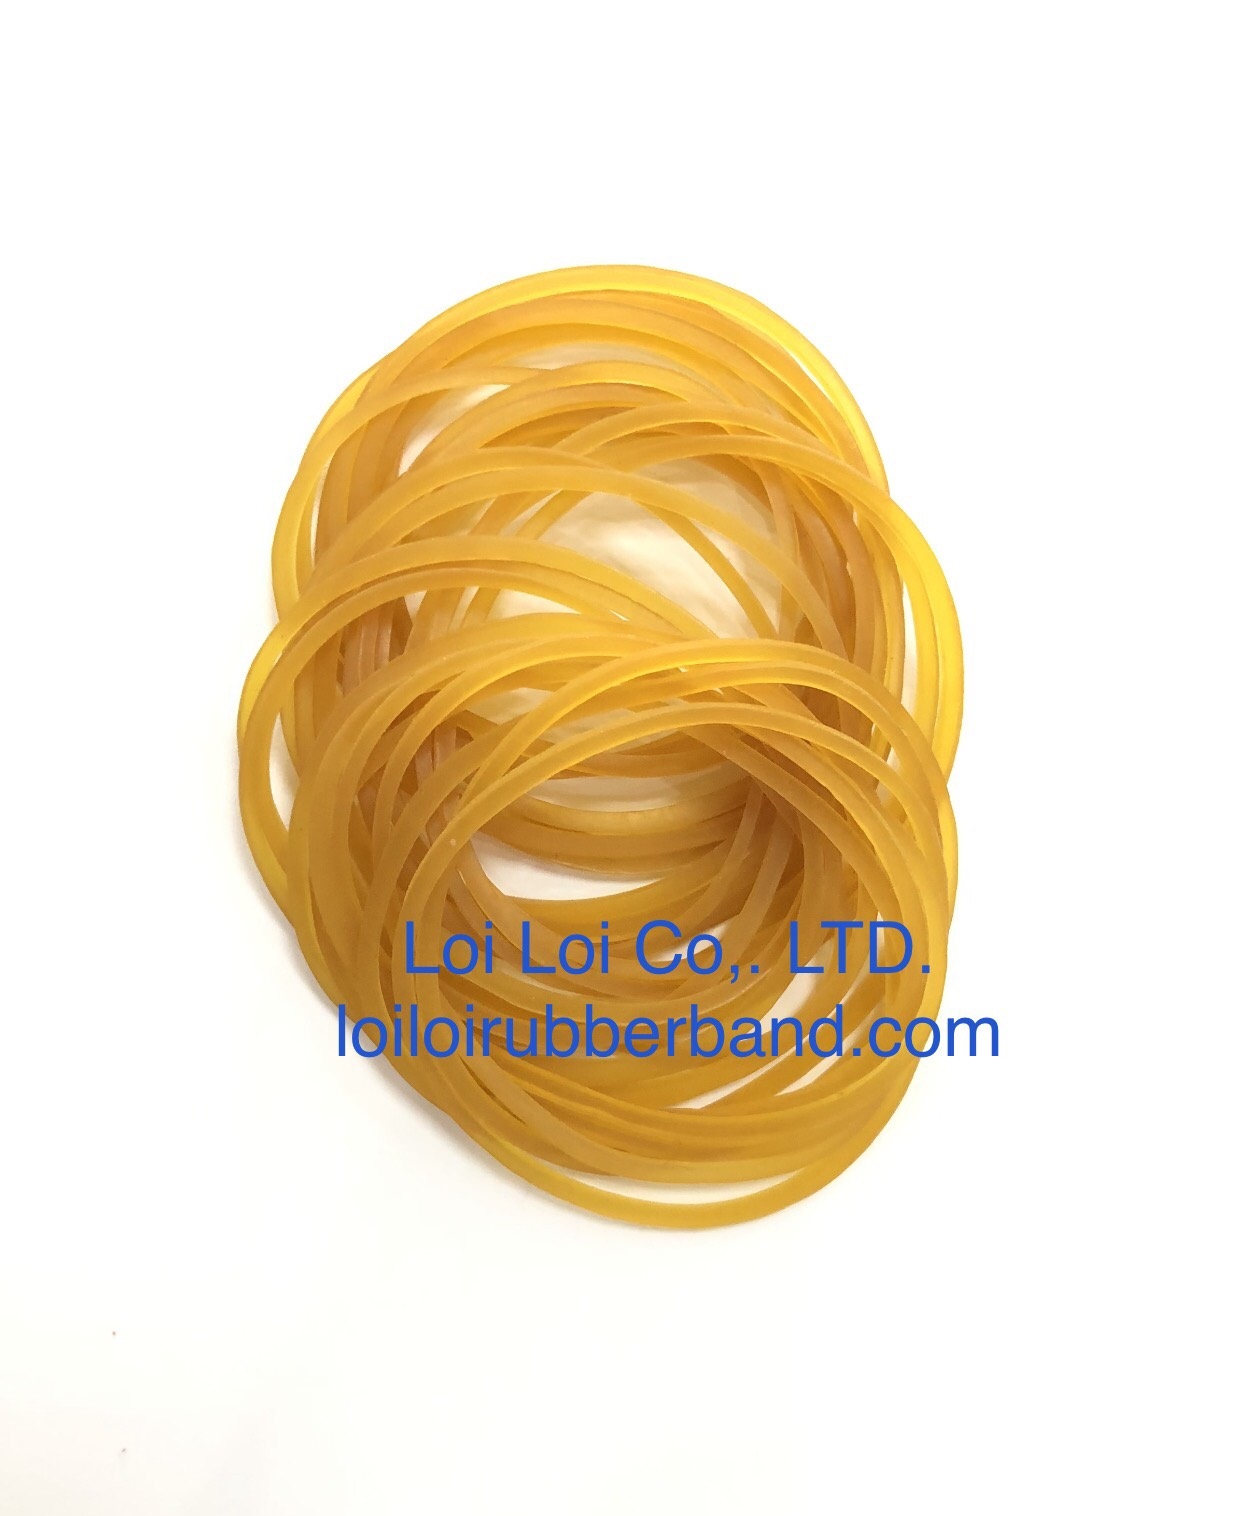 Office Natural Rubber band Good Quality latex free Waterproof various Custom size Colorful eco-friendly safety in school